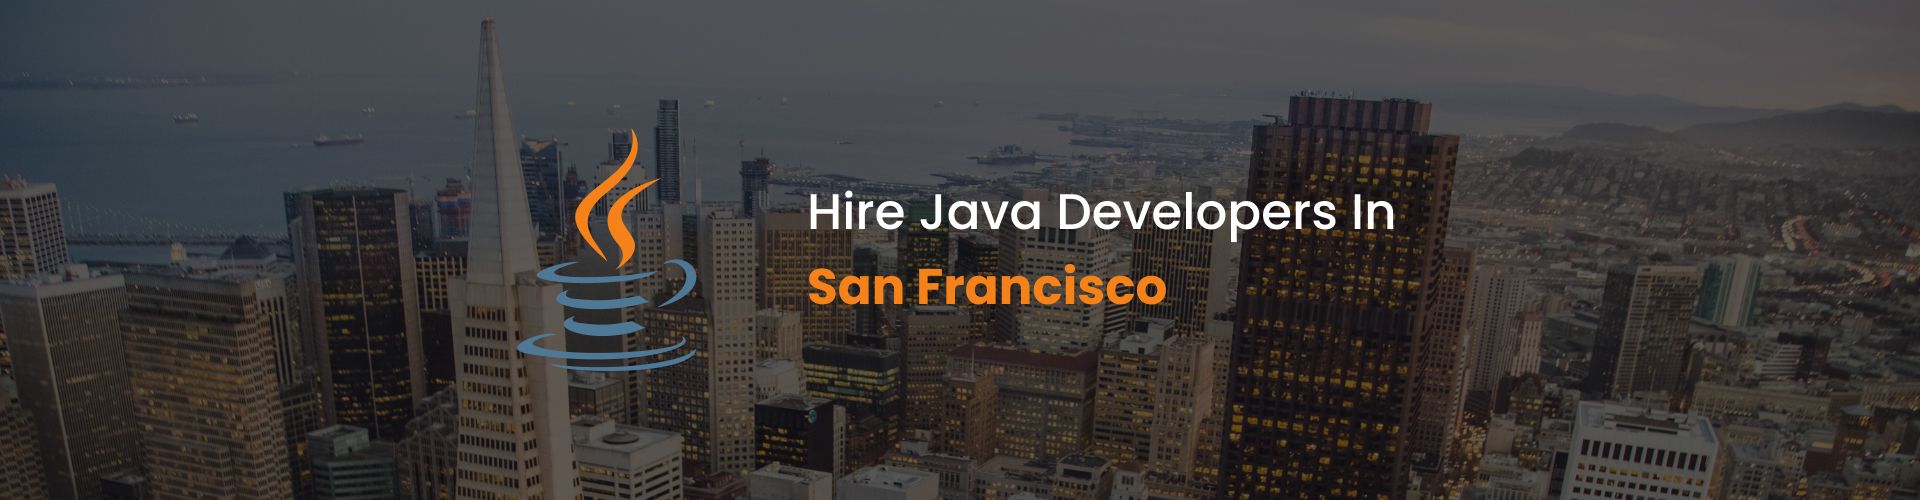 hire java developers in san francisco